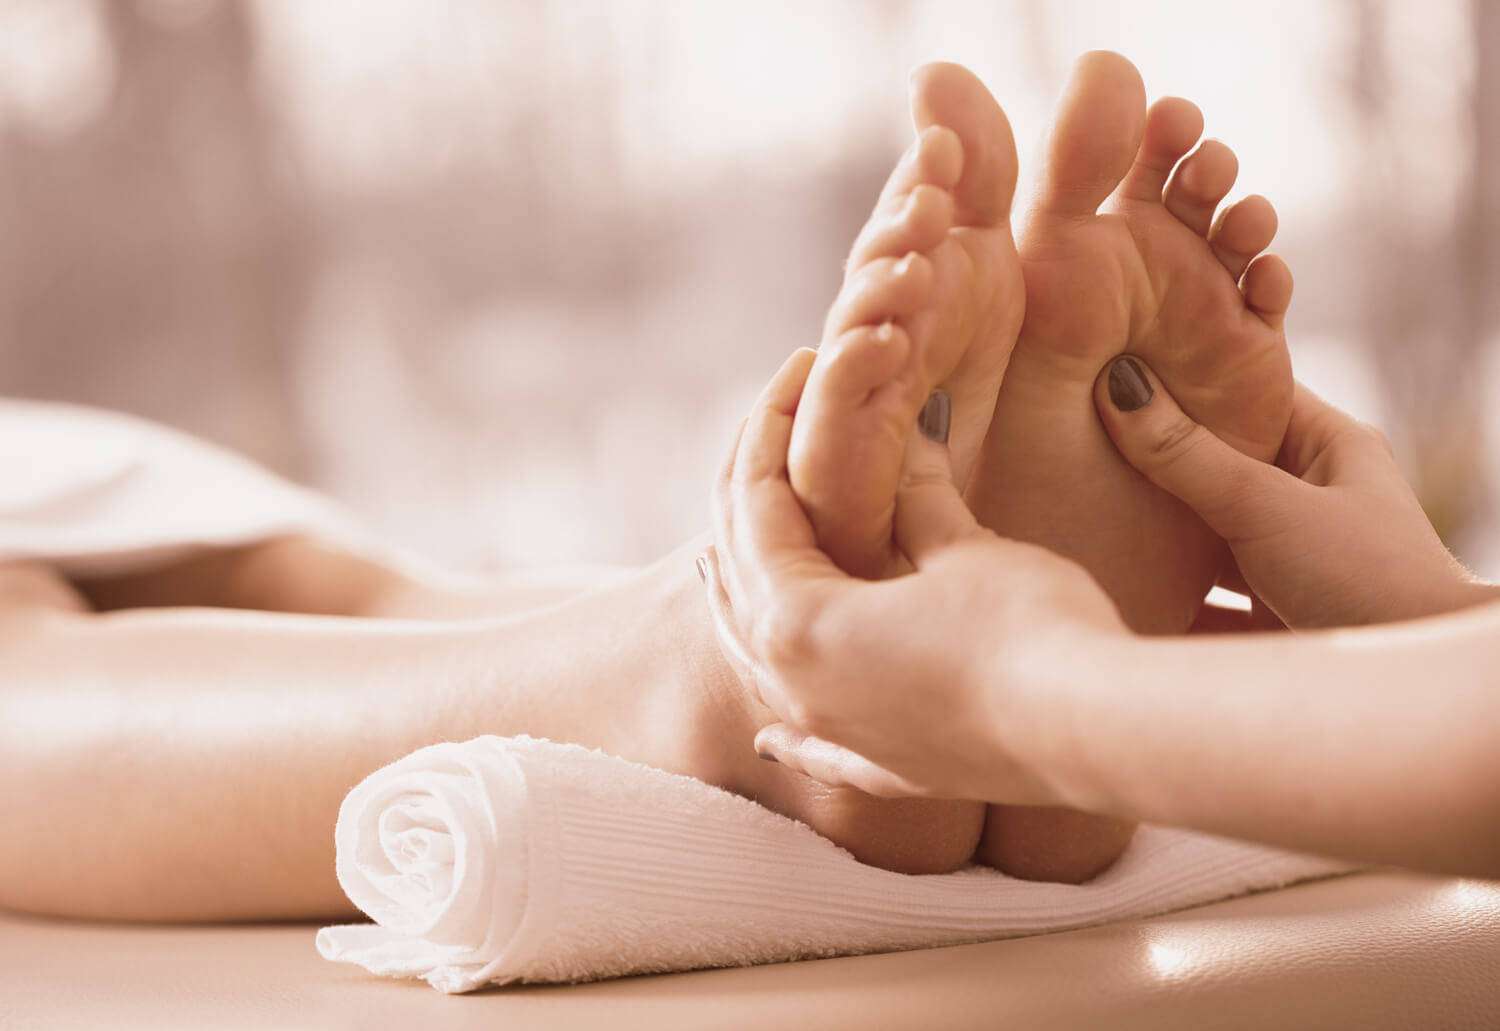 Various intricacies of a foot massage